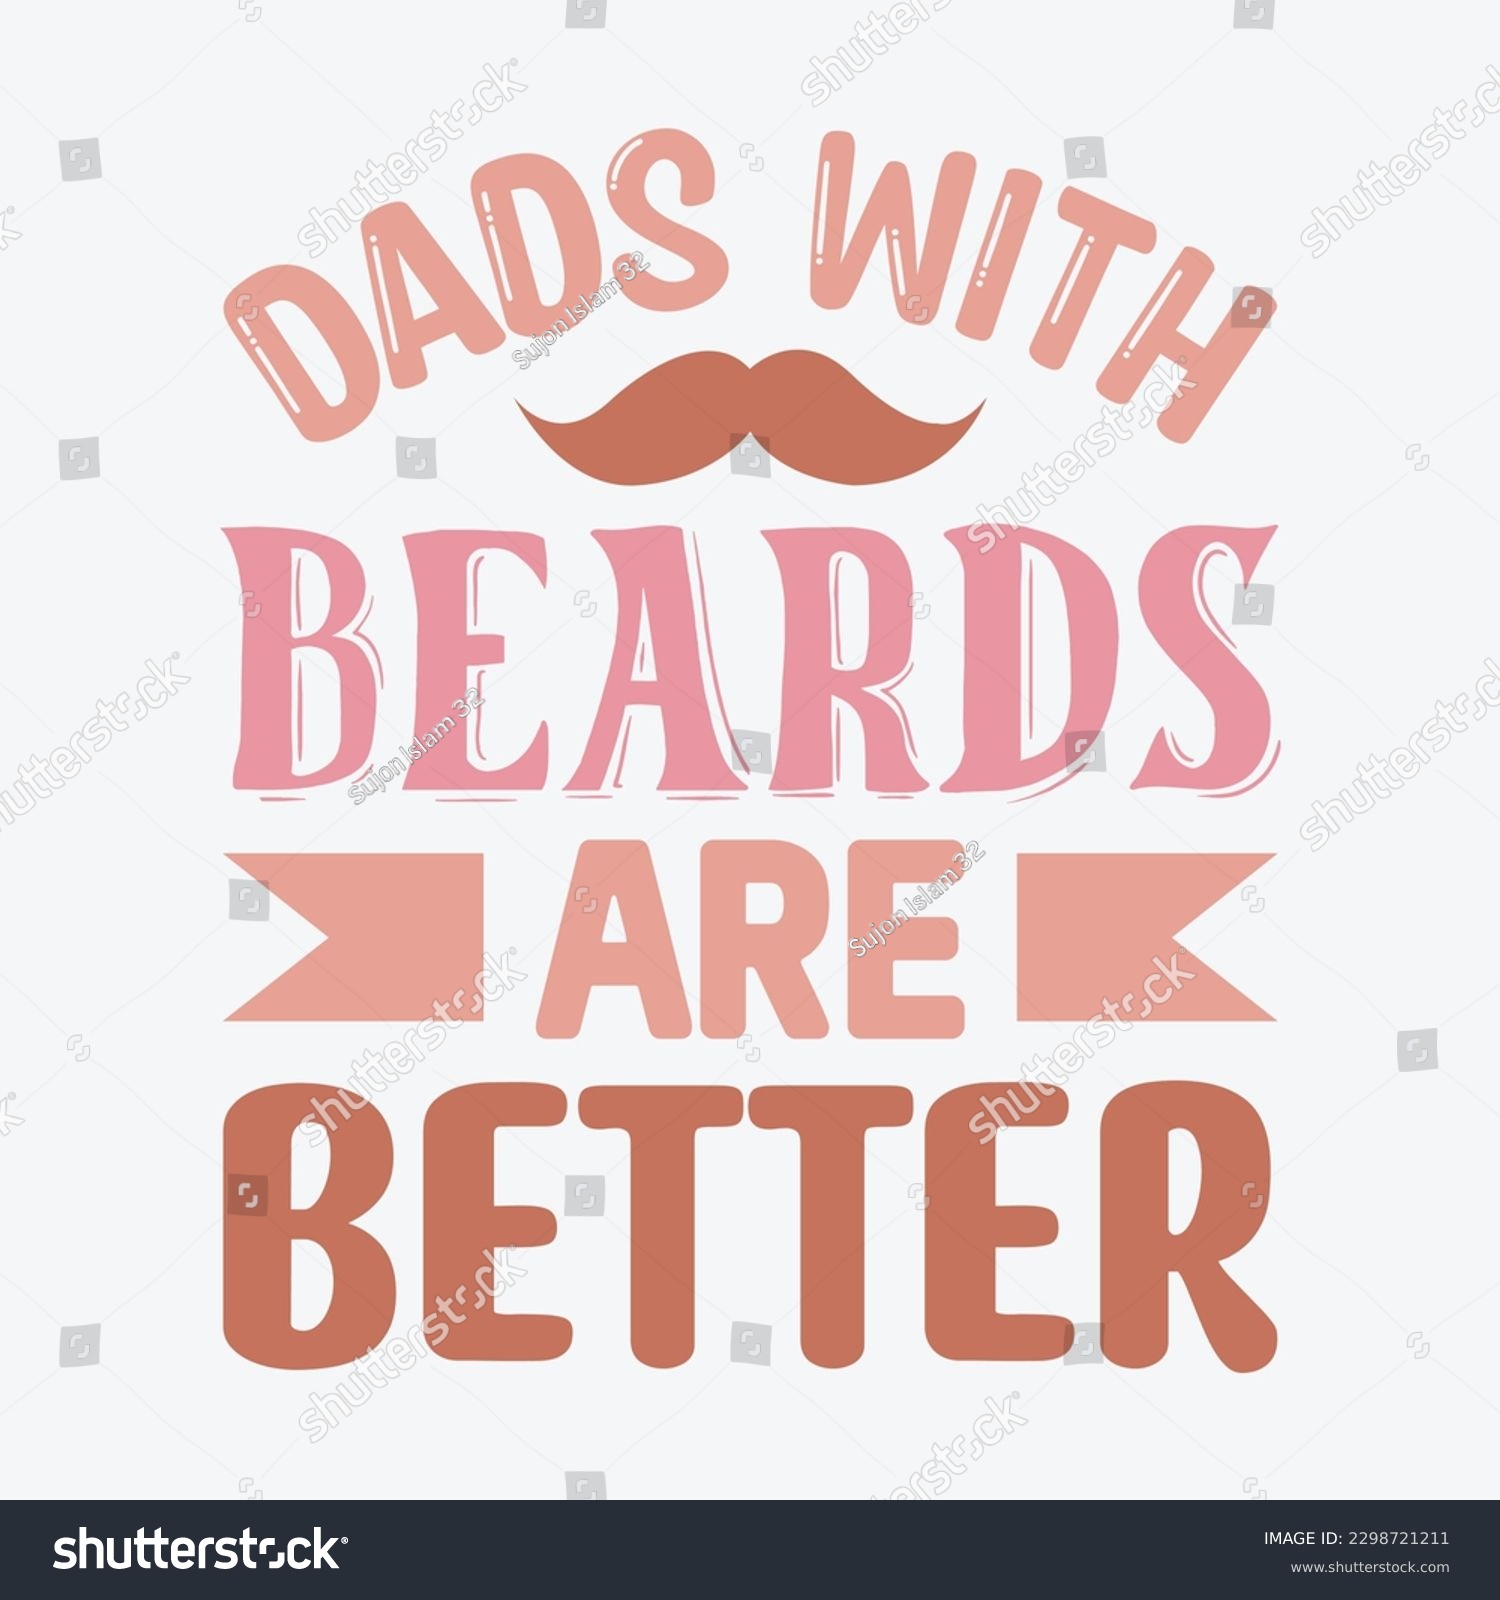 SVG of Dads with Beards Are Better Dad SVG, T-shirt design, Vector File  svg